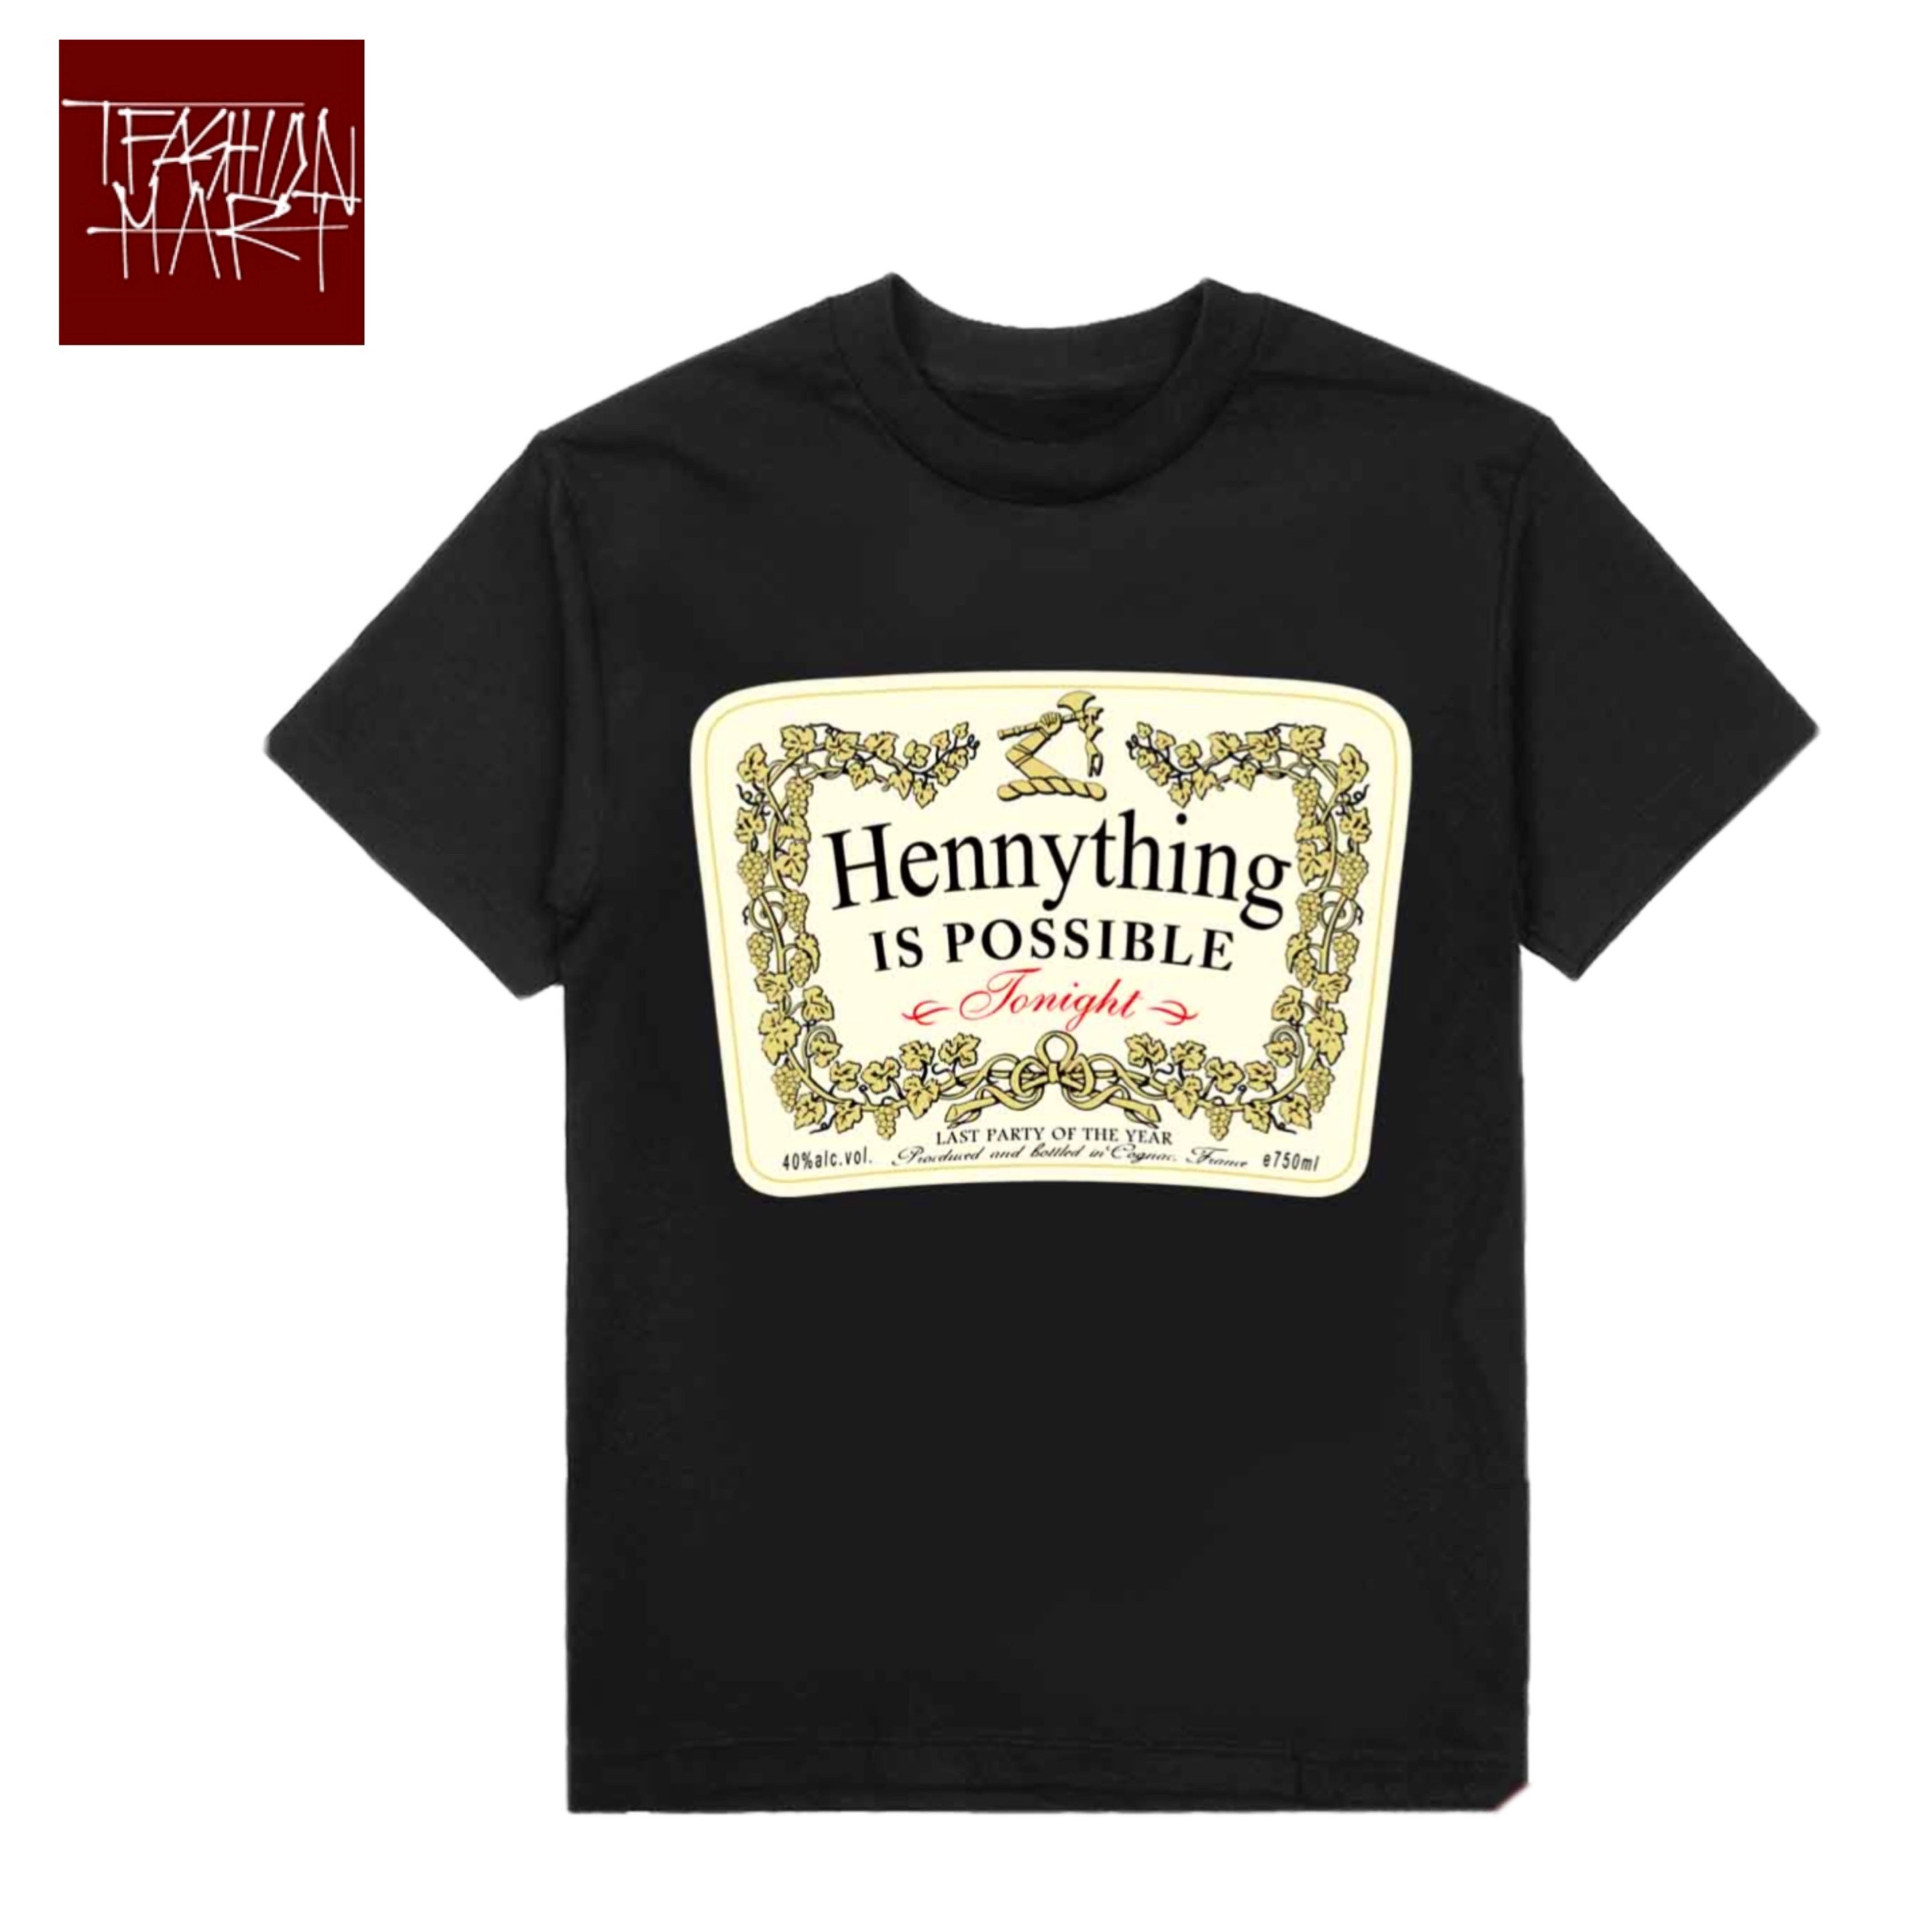 TFashion Graphic Tee - Hennything Is Possible